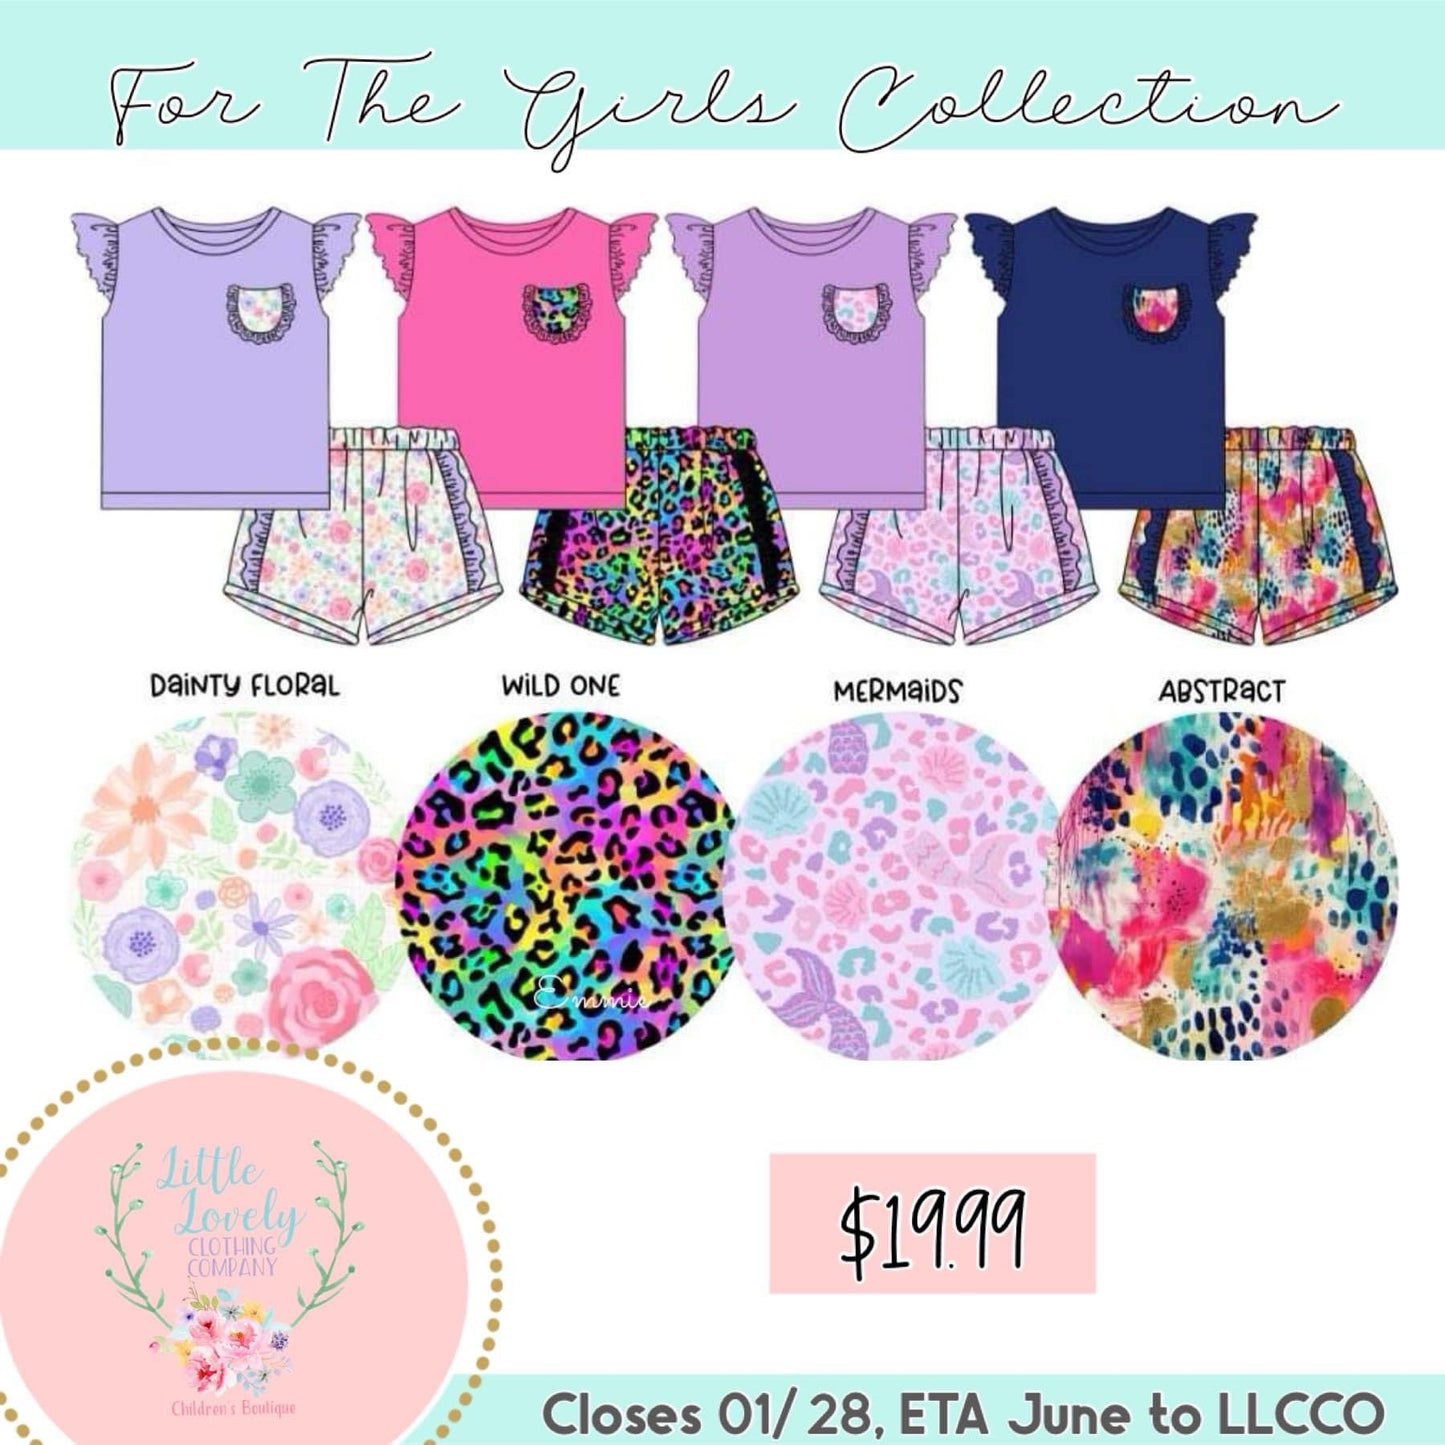 For The Girls Collection Pre-Sale, ETA June to LLCCO